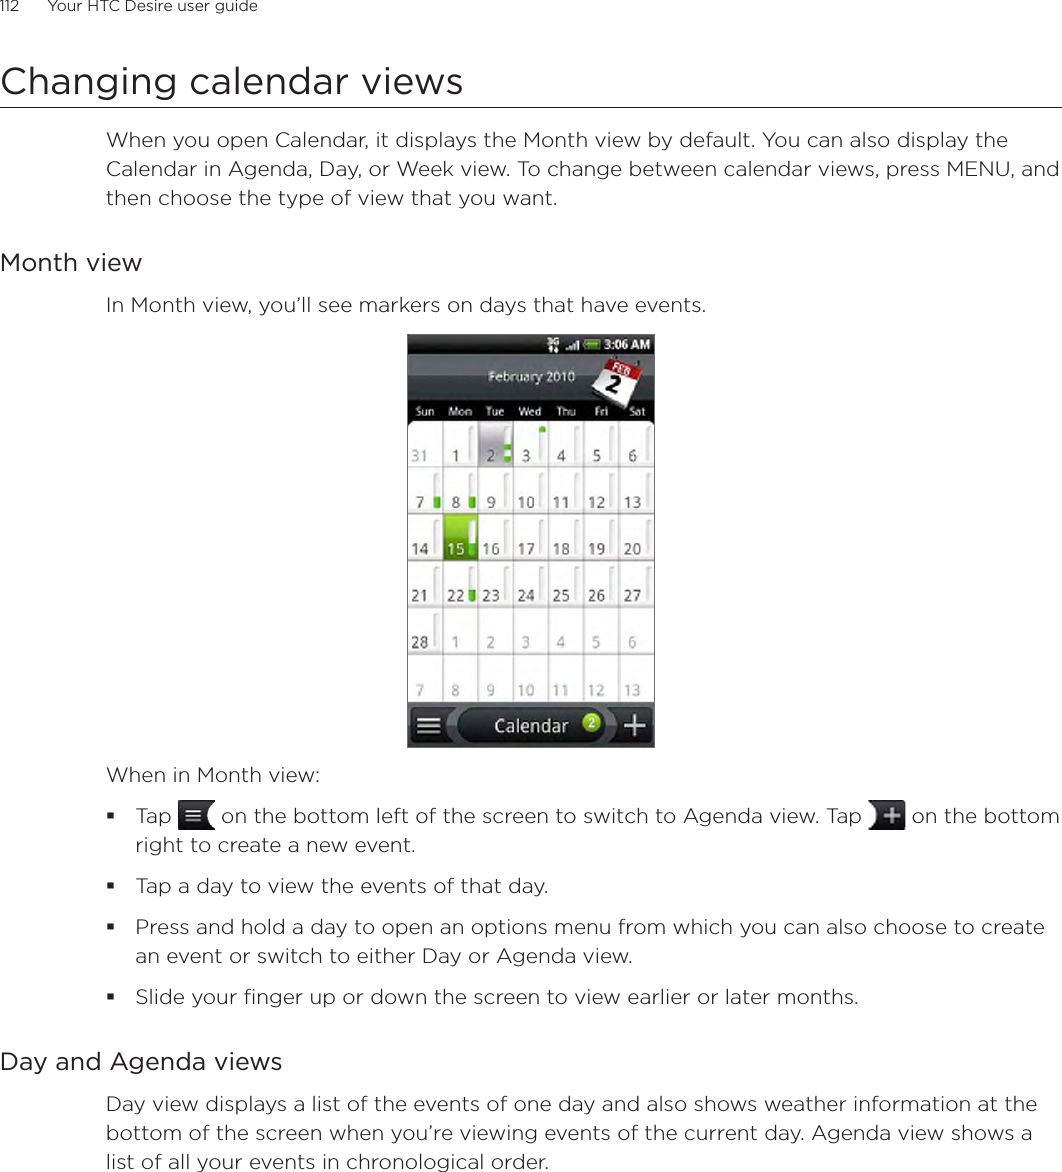 112      Your HTC Desire user guide      Changing calendar viewsWhen you open Calendar, it displays the Month view by default. You can also display the Calendar in Agenda, Day, or Week view. To change between calendar views, press MENU, and then choose the type of view that you want.Month viewIn Month view, you’ll see markers on days that have events.When in Month view:Tap   on the bottom left of the screen to switch to Agenda view. Tap   on the bottom right to create a new event.Tap a day to view the events of that day.Press and hold a day to open an options menu from which you can also choose to create an event or switch to either Day or Agenda view.Slide your finger up or down the screen to view earlier or later months.Day and Agenda viewsDay view displays a list of the events of one day and also shows weather information at the bottom of the screen when you’re viewing events of the current day. Agenda view shows a list of all your events in chronological order. 